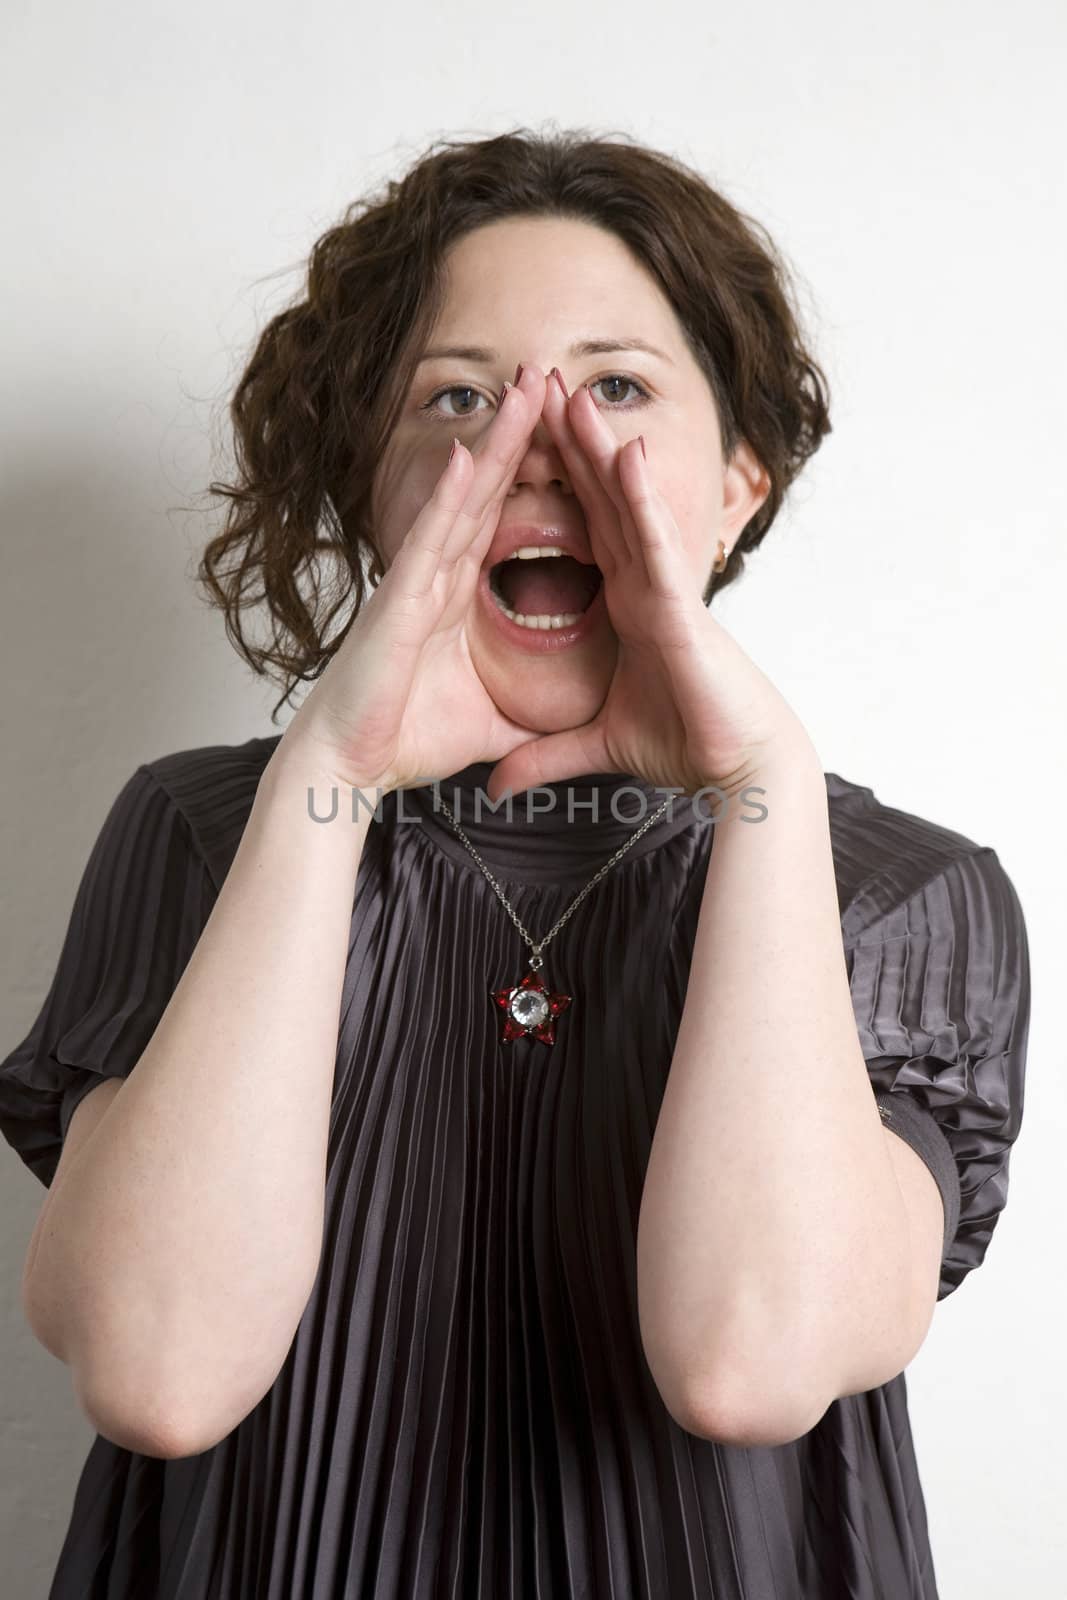 Young adorable woman shouting. White background